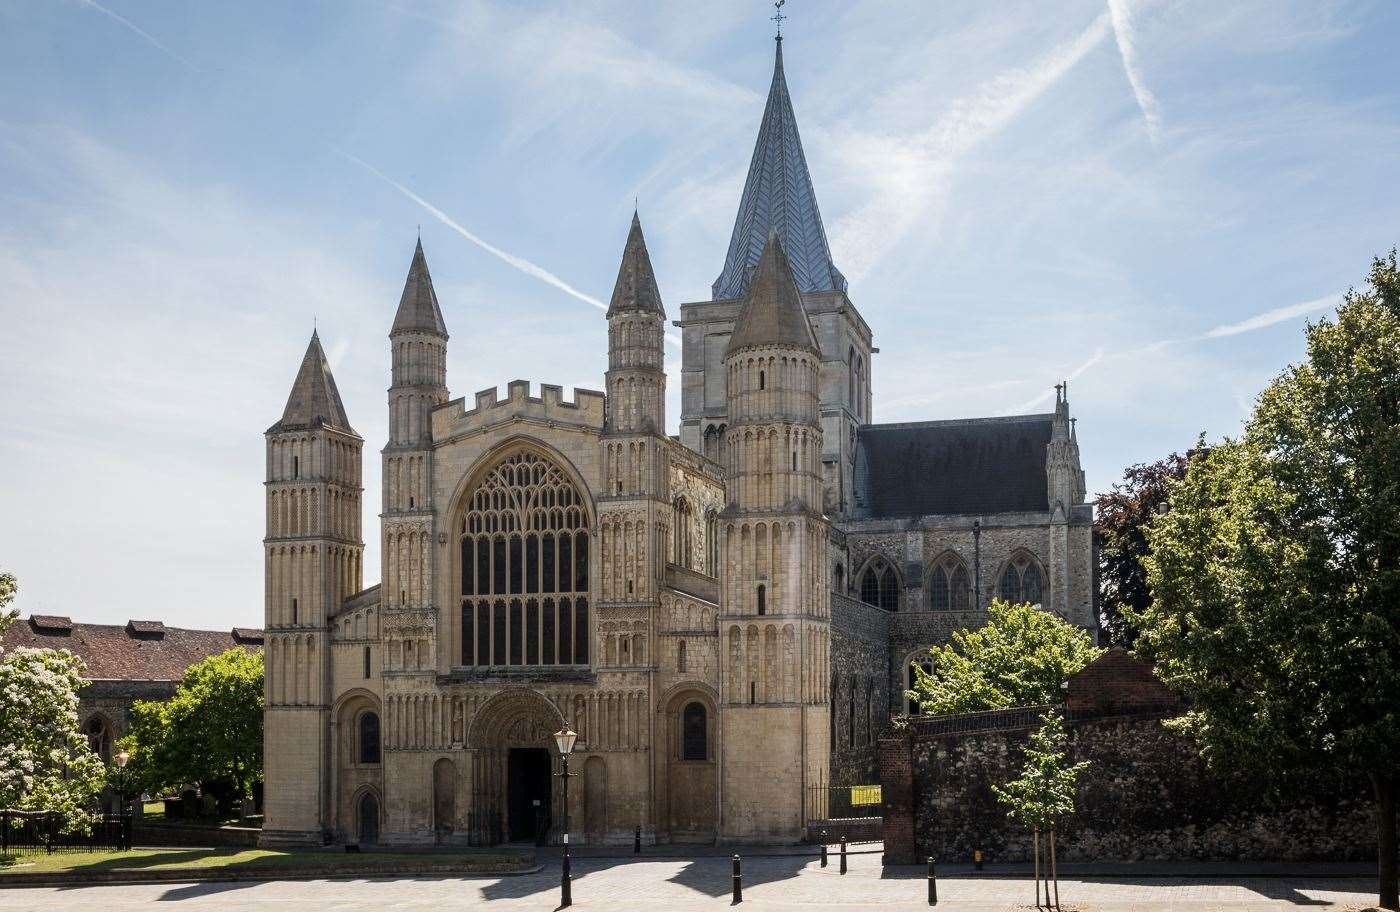 Rochester Cathedral dates back hundreds of years and is the second oldest cathedral in England, after Canterbury Cathedral